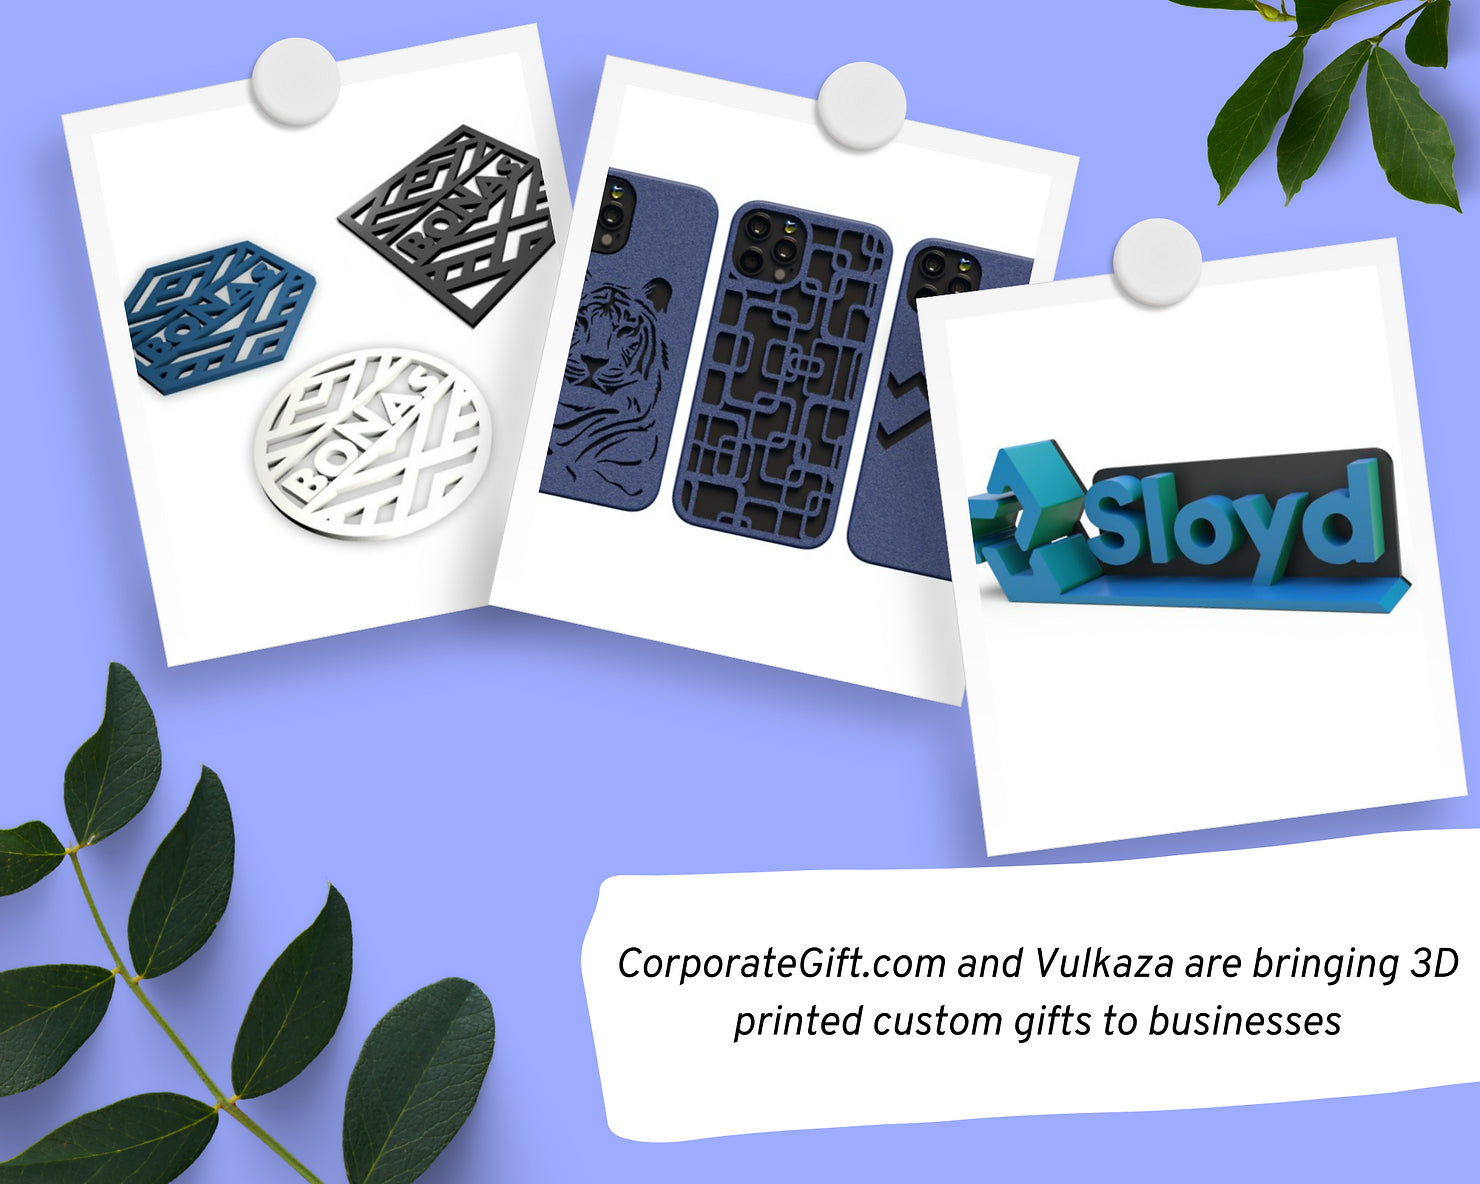 CorporateGift.com and Vulkaza are bringing 3D printed custom gifts to businesses